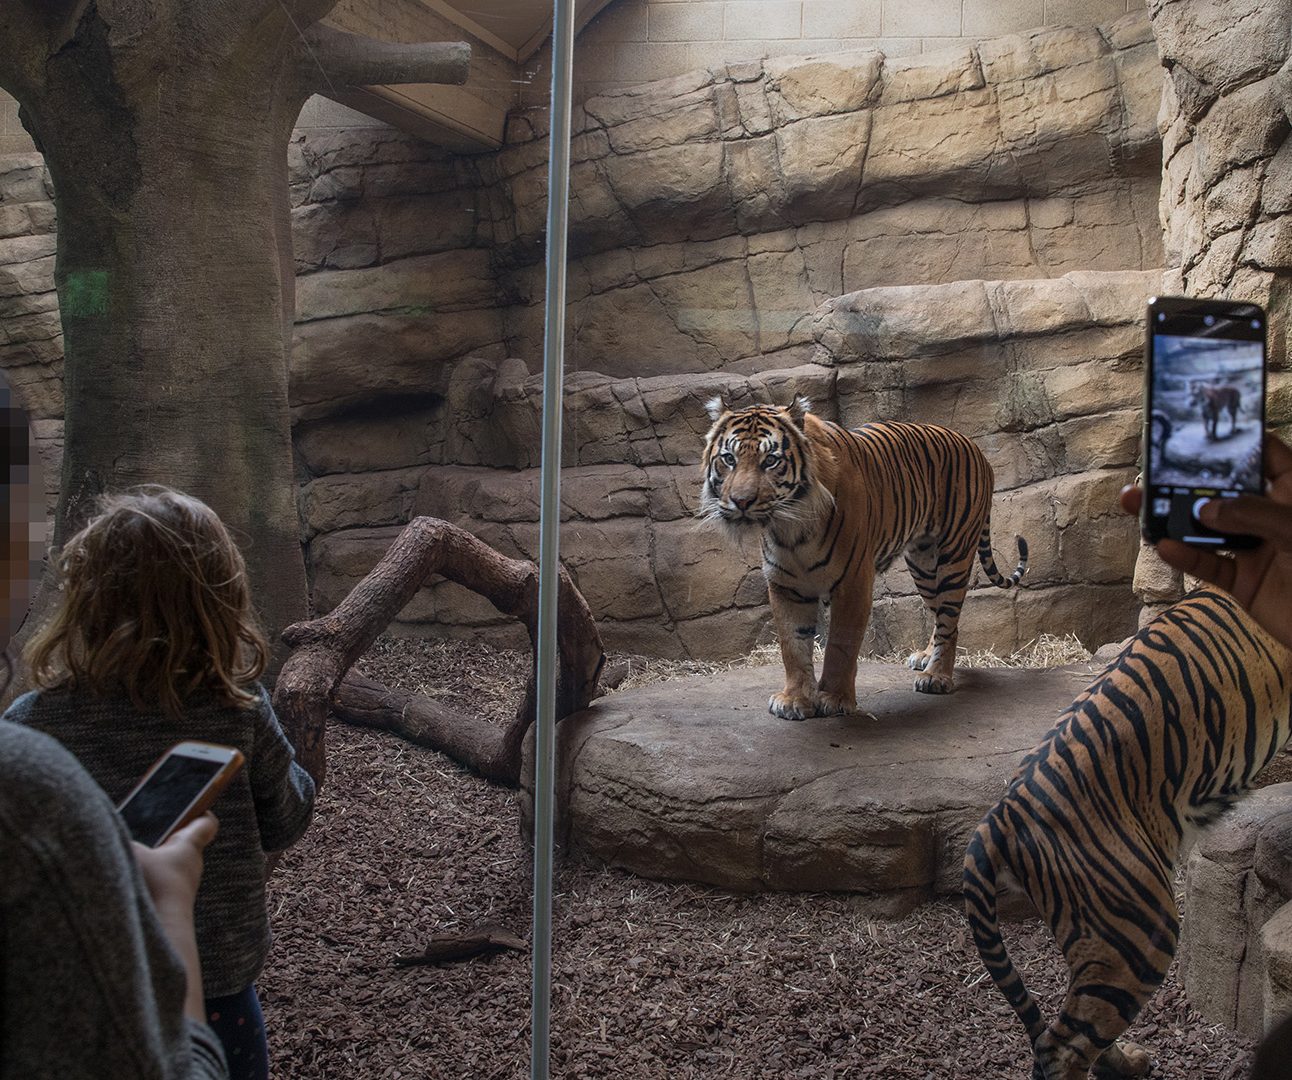 Two tigers are in a small zoo enclosure behind glass, people stand taking photos through the glass